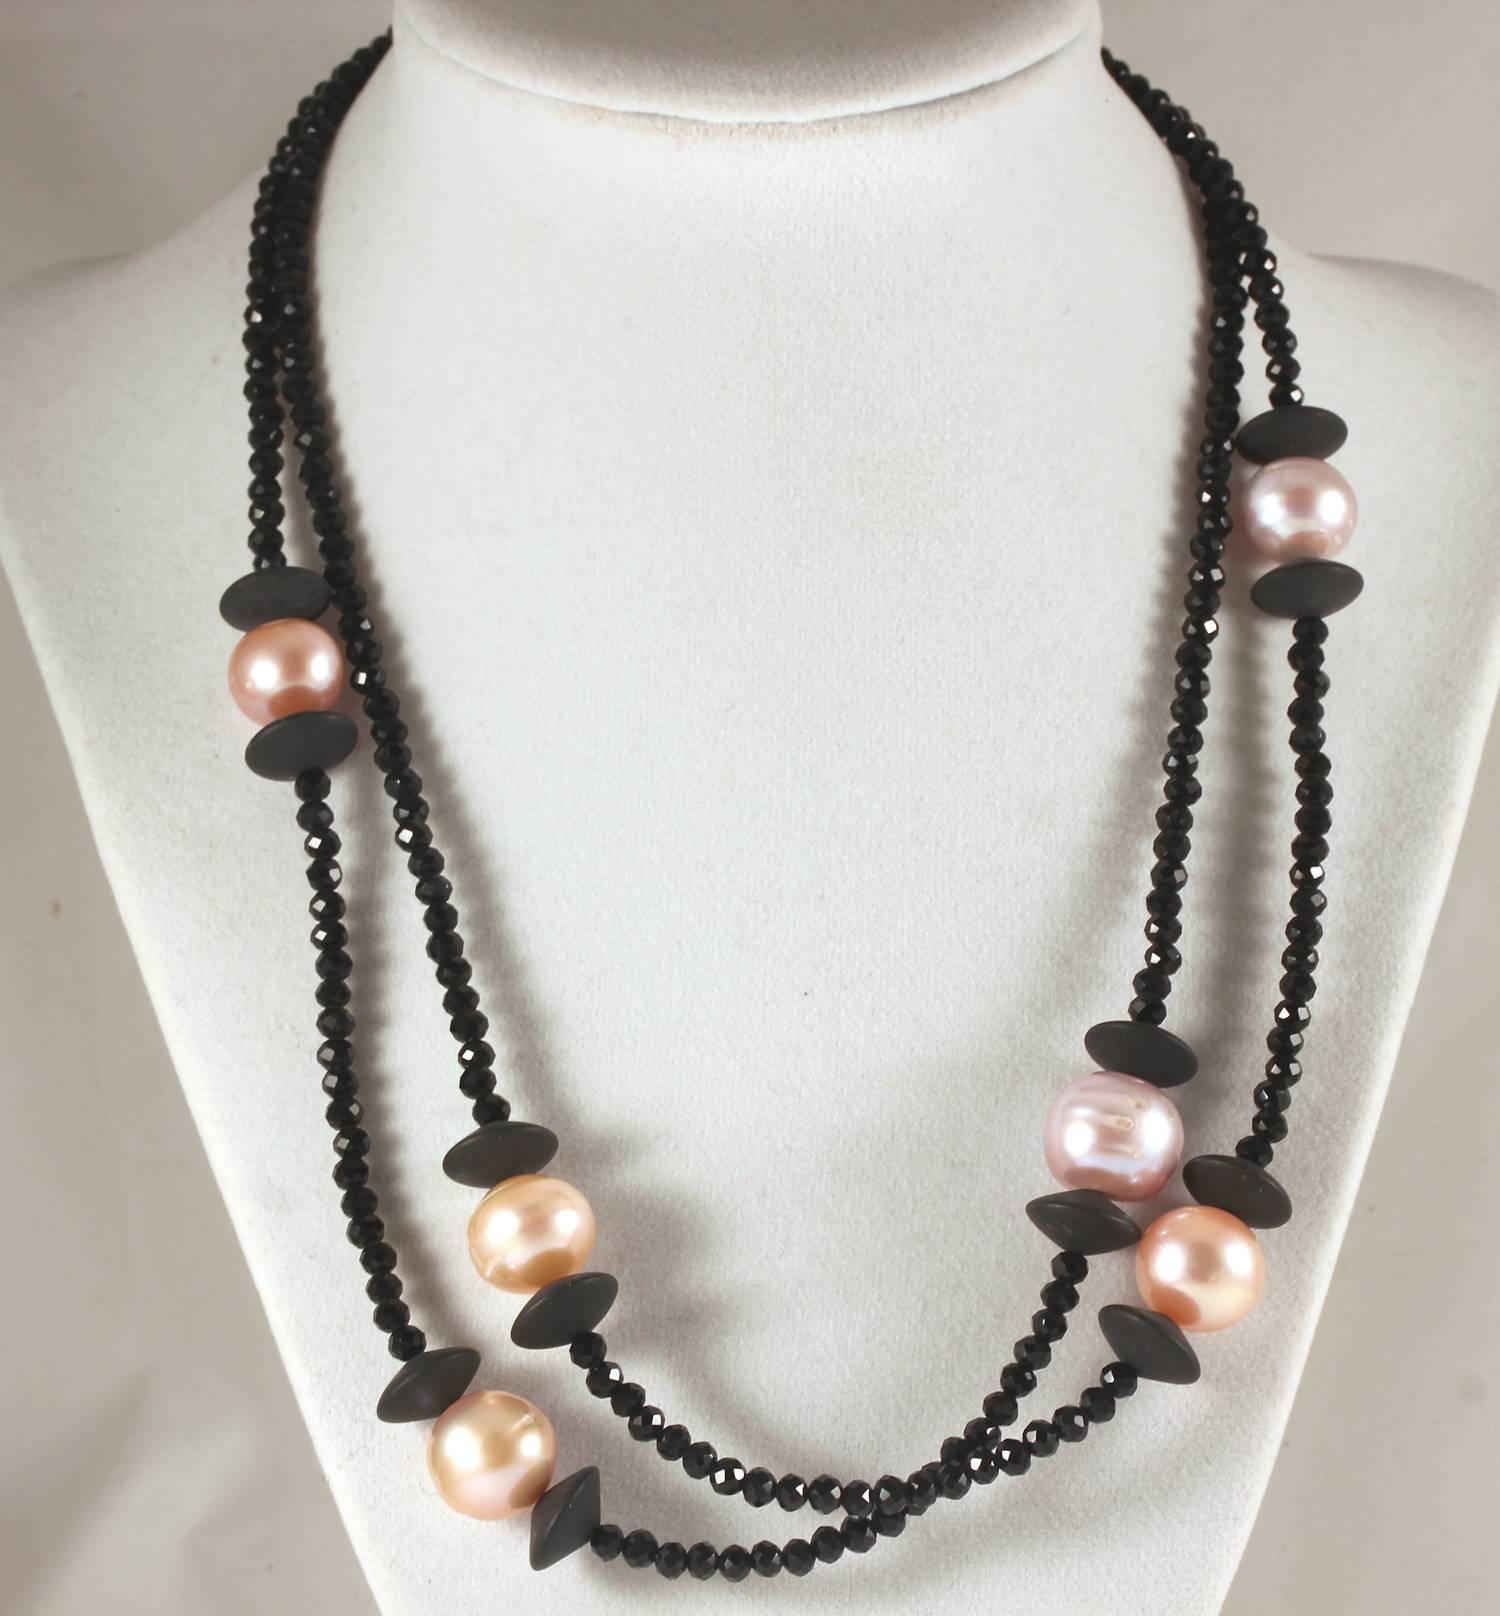 Unique Handmade Double strand of sparkly black Spinel enhanced with different colored glowing cultured South Sea Pearls necklace
Size:  Pearls approximately 13.5 mm; Length:  19.5 inches
Clasp:  Sterling Silver inlaid with tiny diamonds    